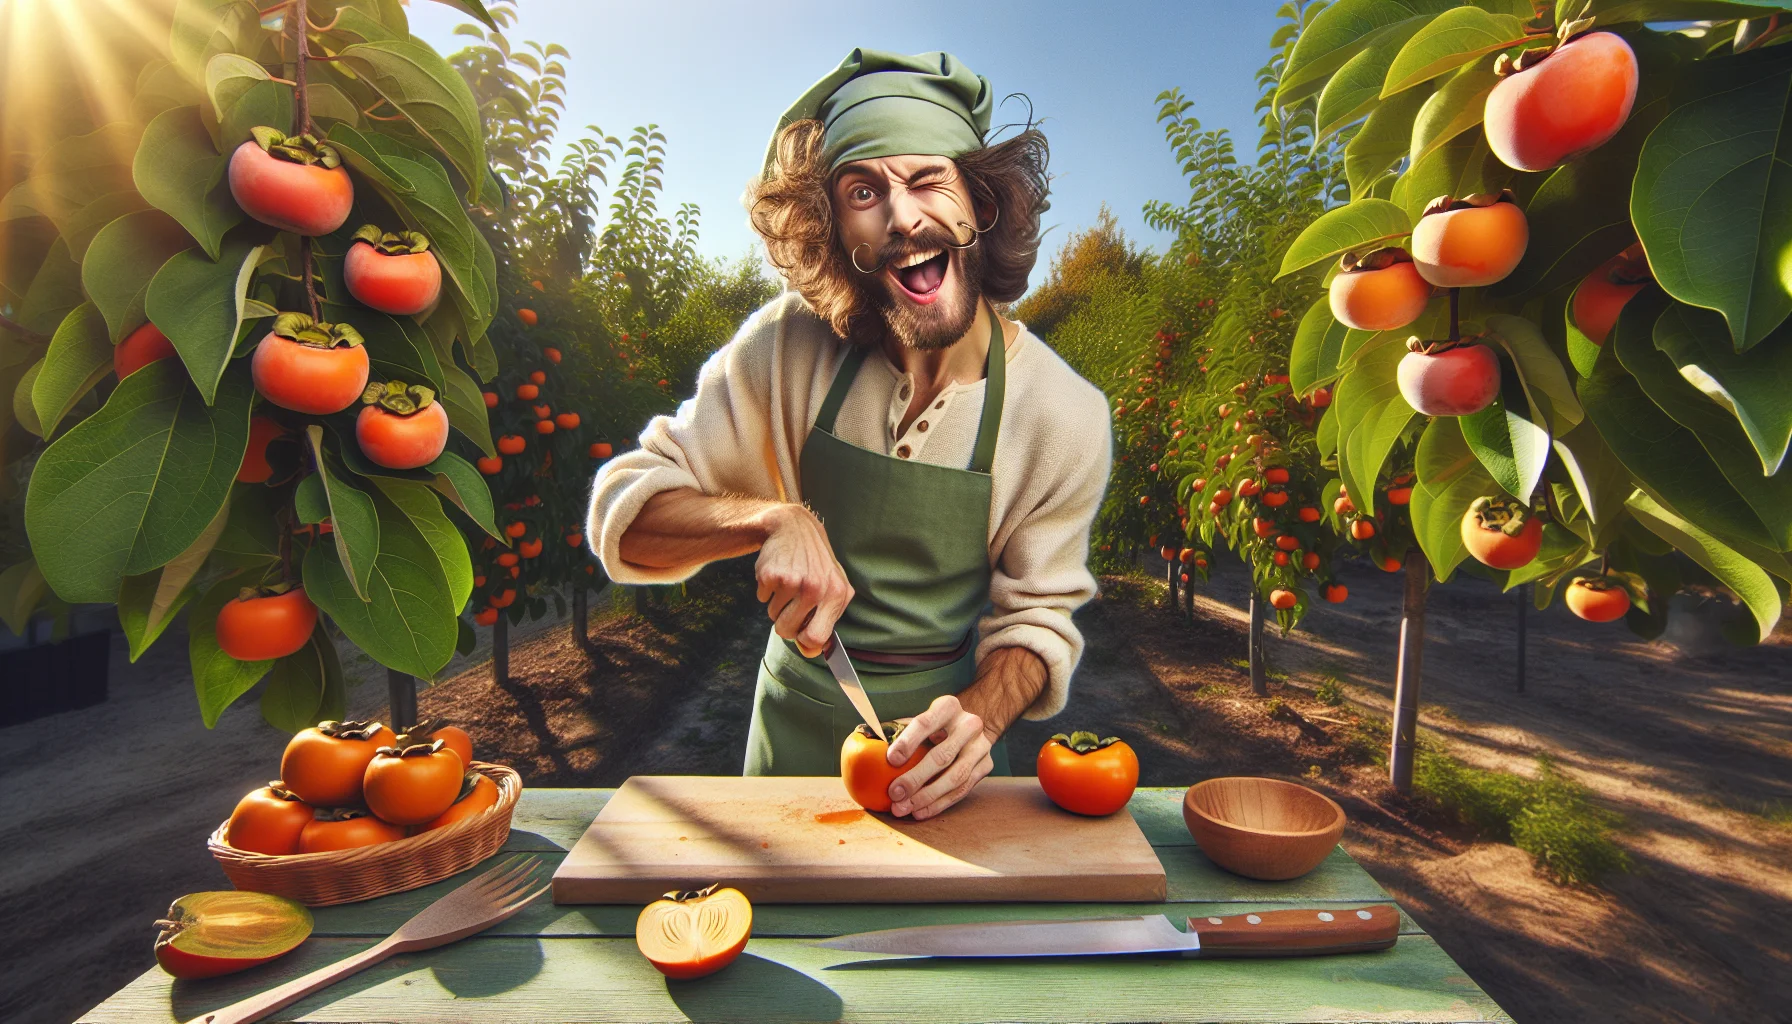 An amusing yet informative image that exhibits the process of preparing a persimmon fruit. A slight jester character, Caucasian male with curly hair and expressive gestures, is seen wearing a green apron over a light-colored clothing. He is standing in a sunny garden, full of lush green plantations and persimmon trees loaded with bright orange fruits. Equipped with a wooden cutting board, a knife, and a freshly picked persimmon, he dramatically strikes a pose where he playfully winks and sticks his tongue out, about to begin the preparation. In order to motivate all to participate in gardening and experience the joy of harvesting own fruits.